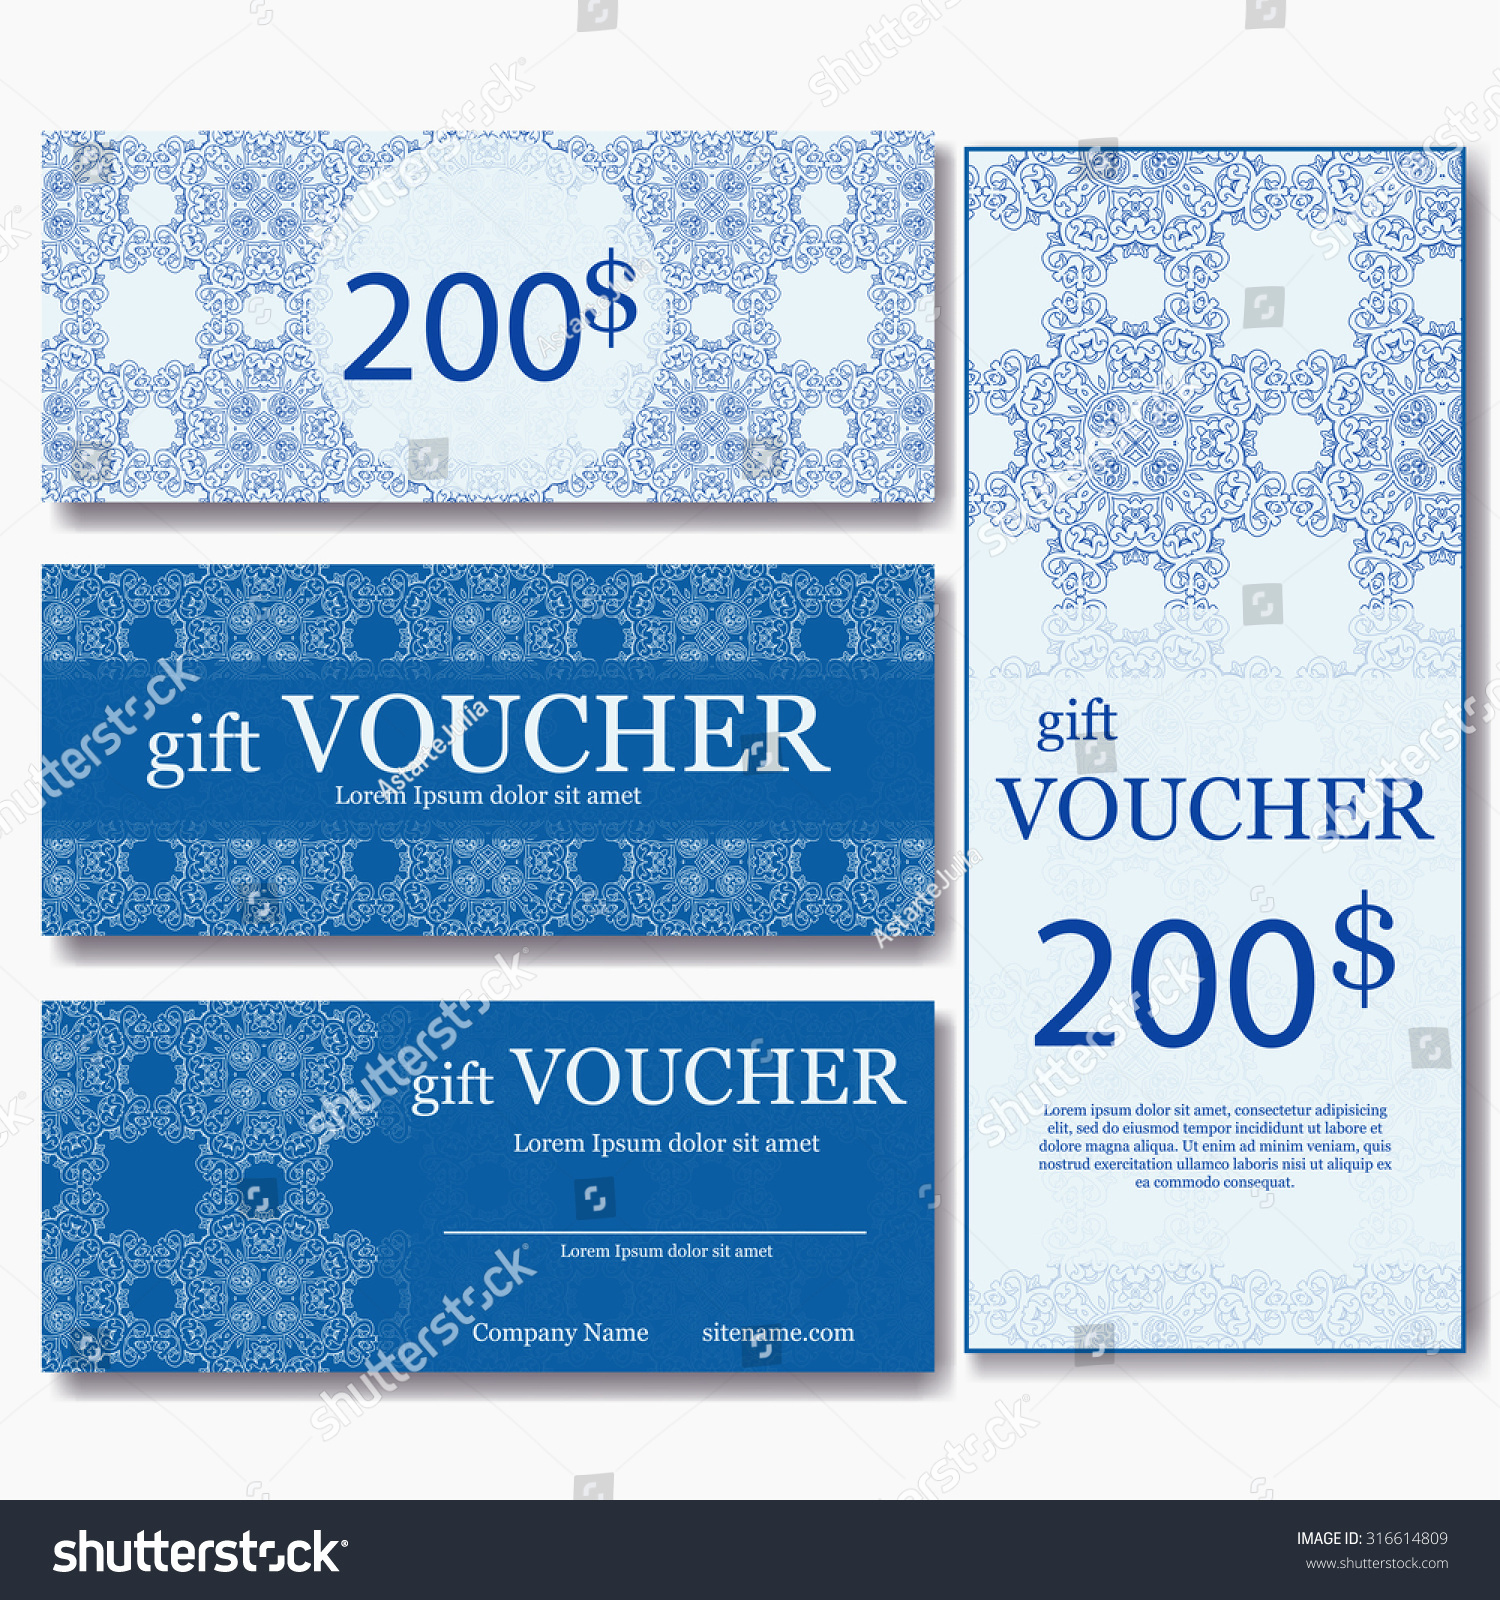 Magazine Subscription Gift Certificate Template Fresh Gift Voucher Template with Mandala Design Certificate for